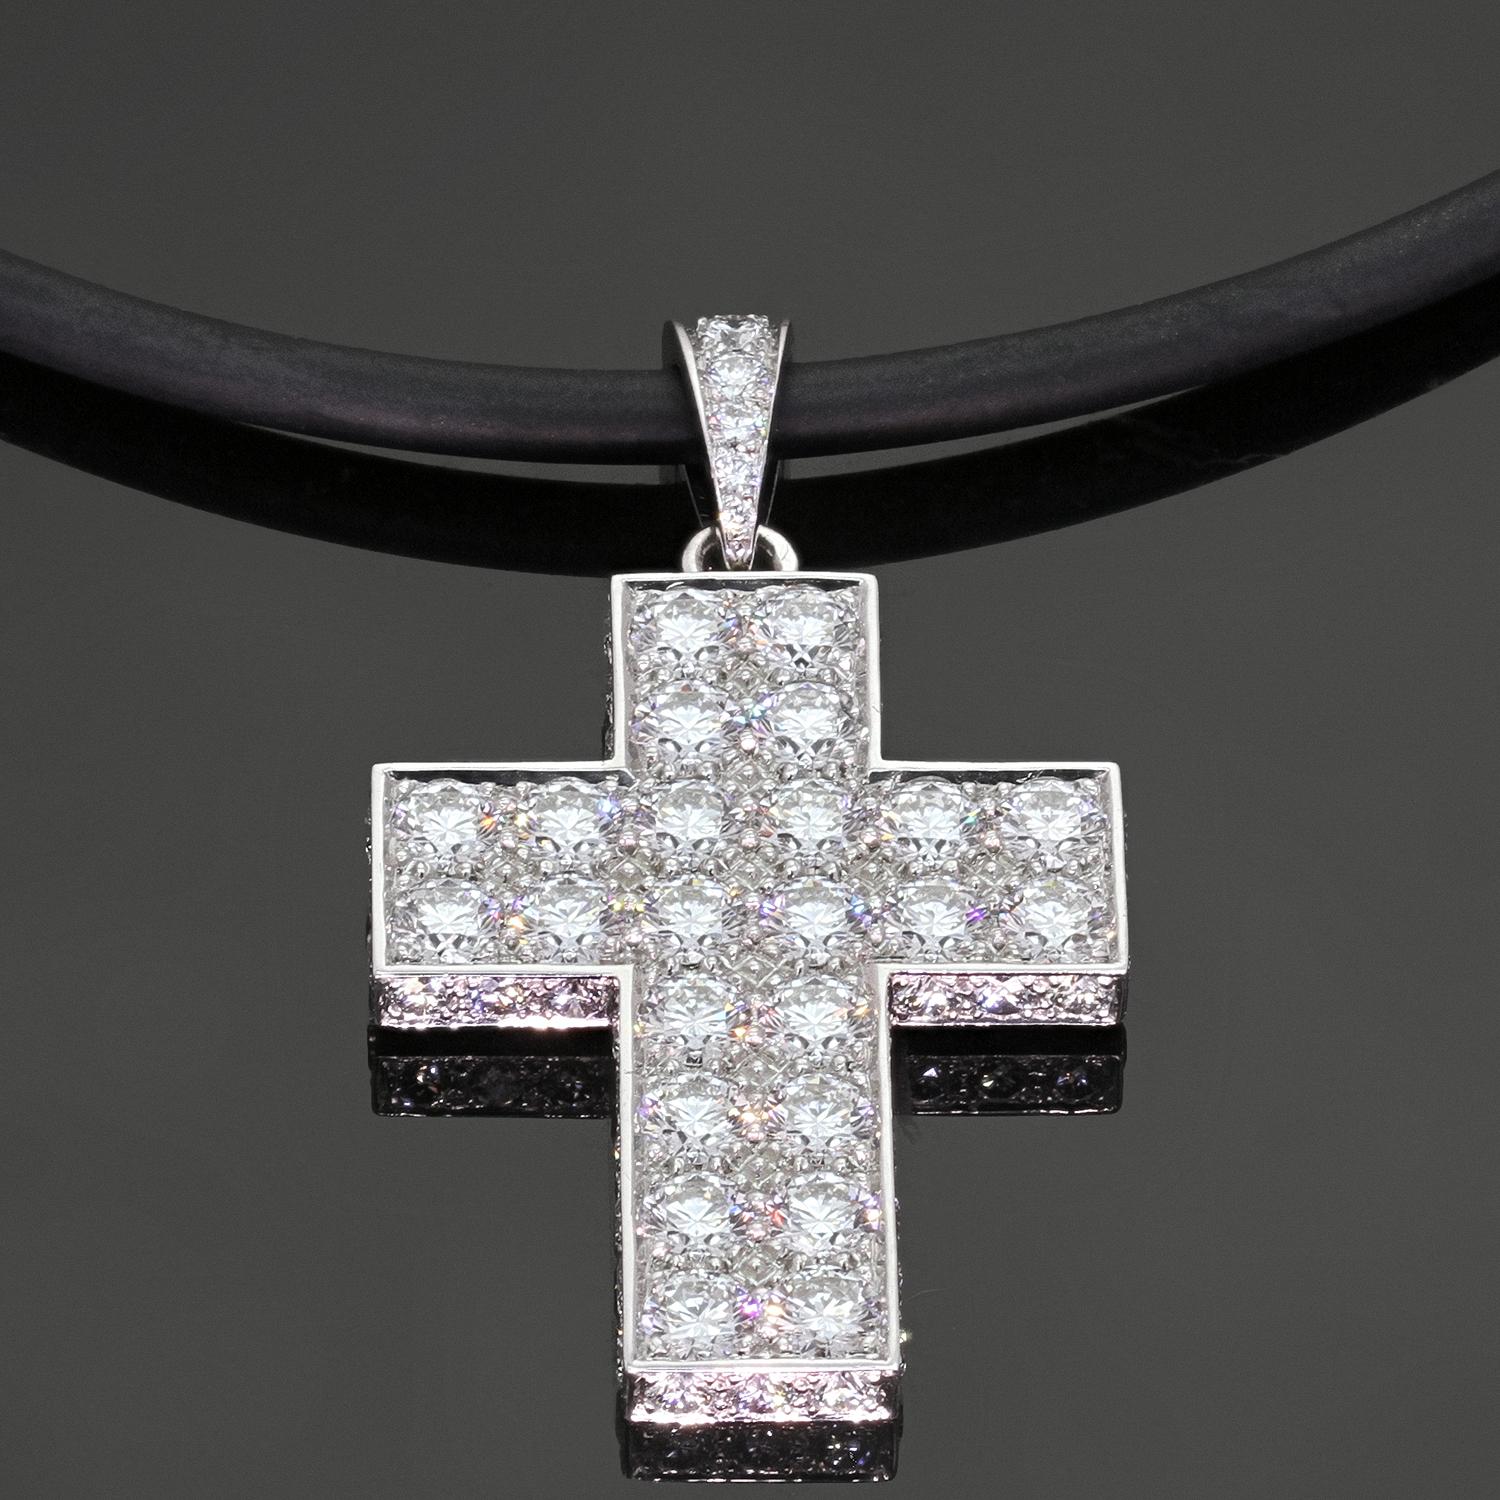 This stunning Cartier pendant is designed as a Latin cross crafted in 18k white gold and set with approximately 70 brilliant-cut round diamonds weighing an estimated 6.50 carats. The pendant features a diamond pave on the front and the sides and the